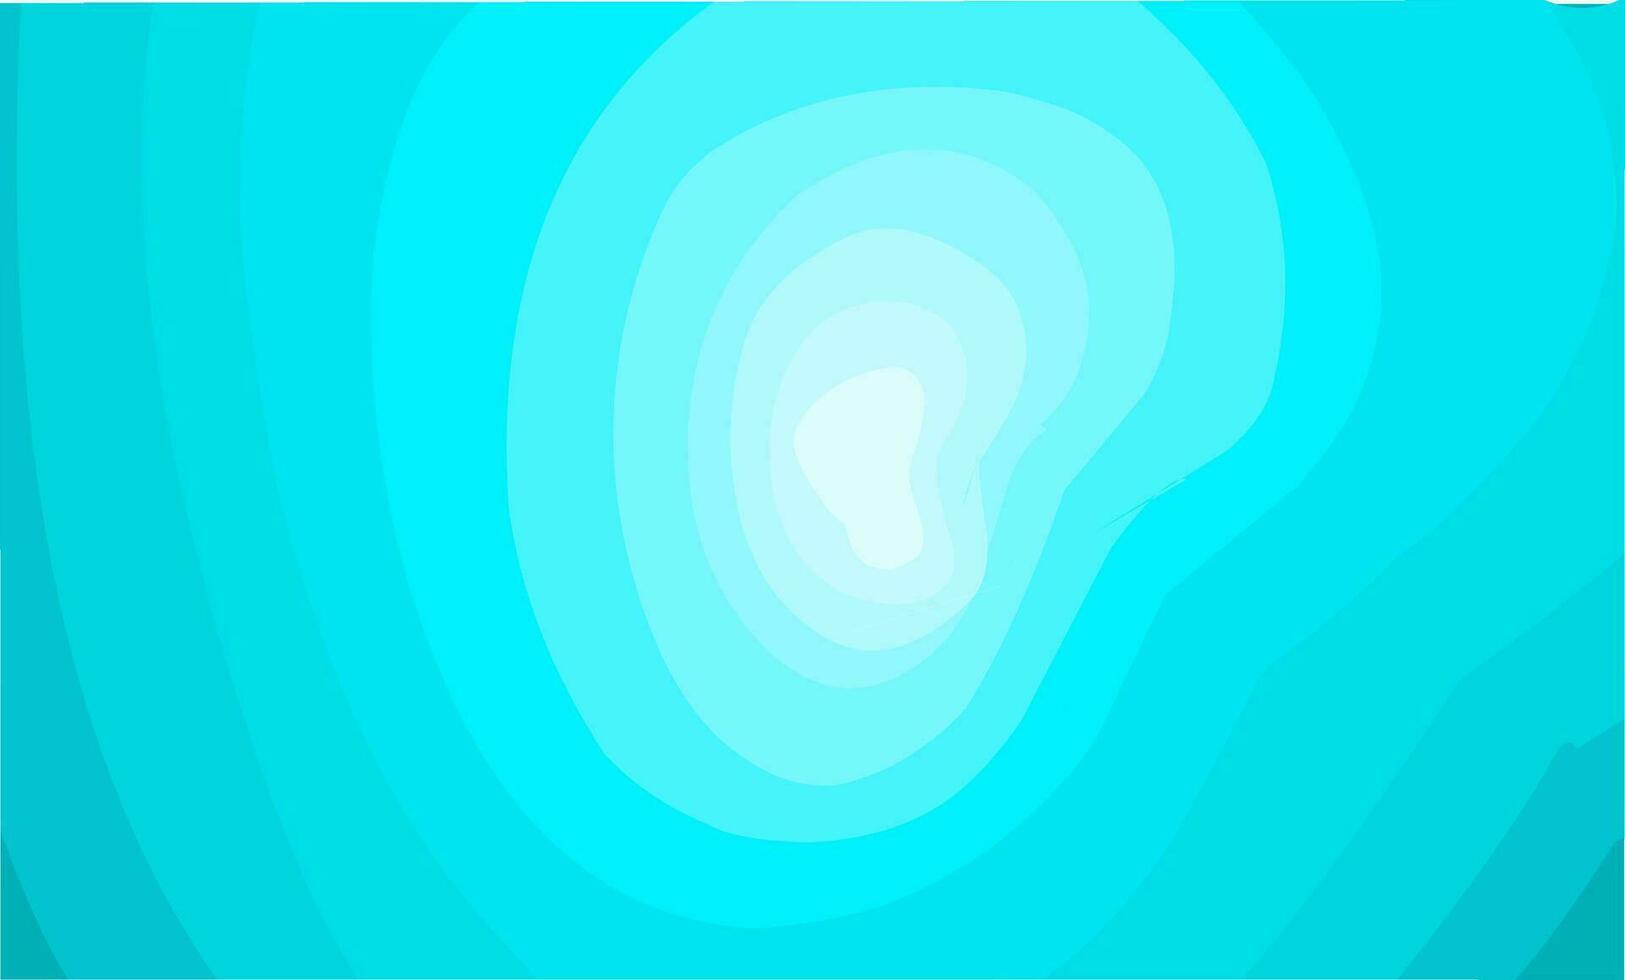 abstract blue waves texture gradient background vector